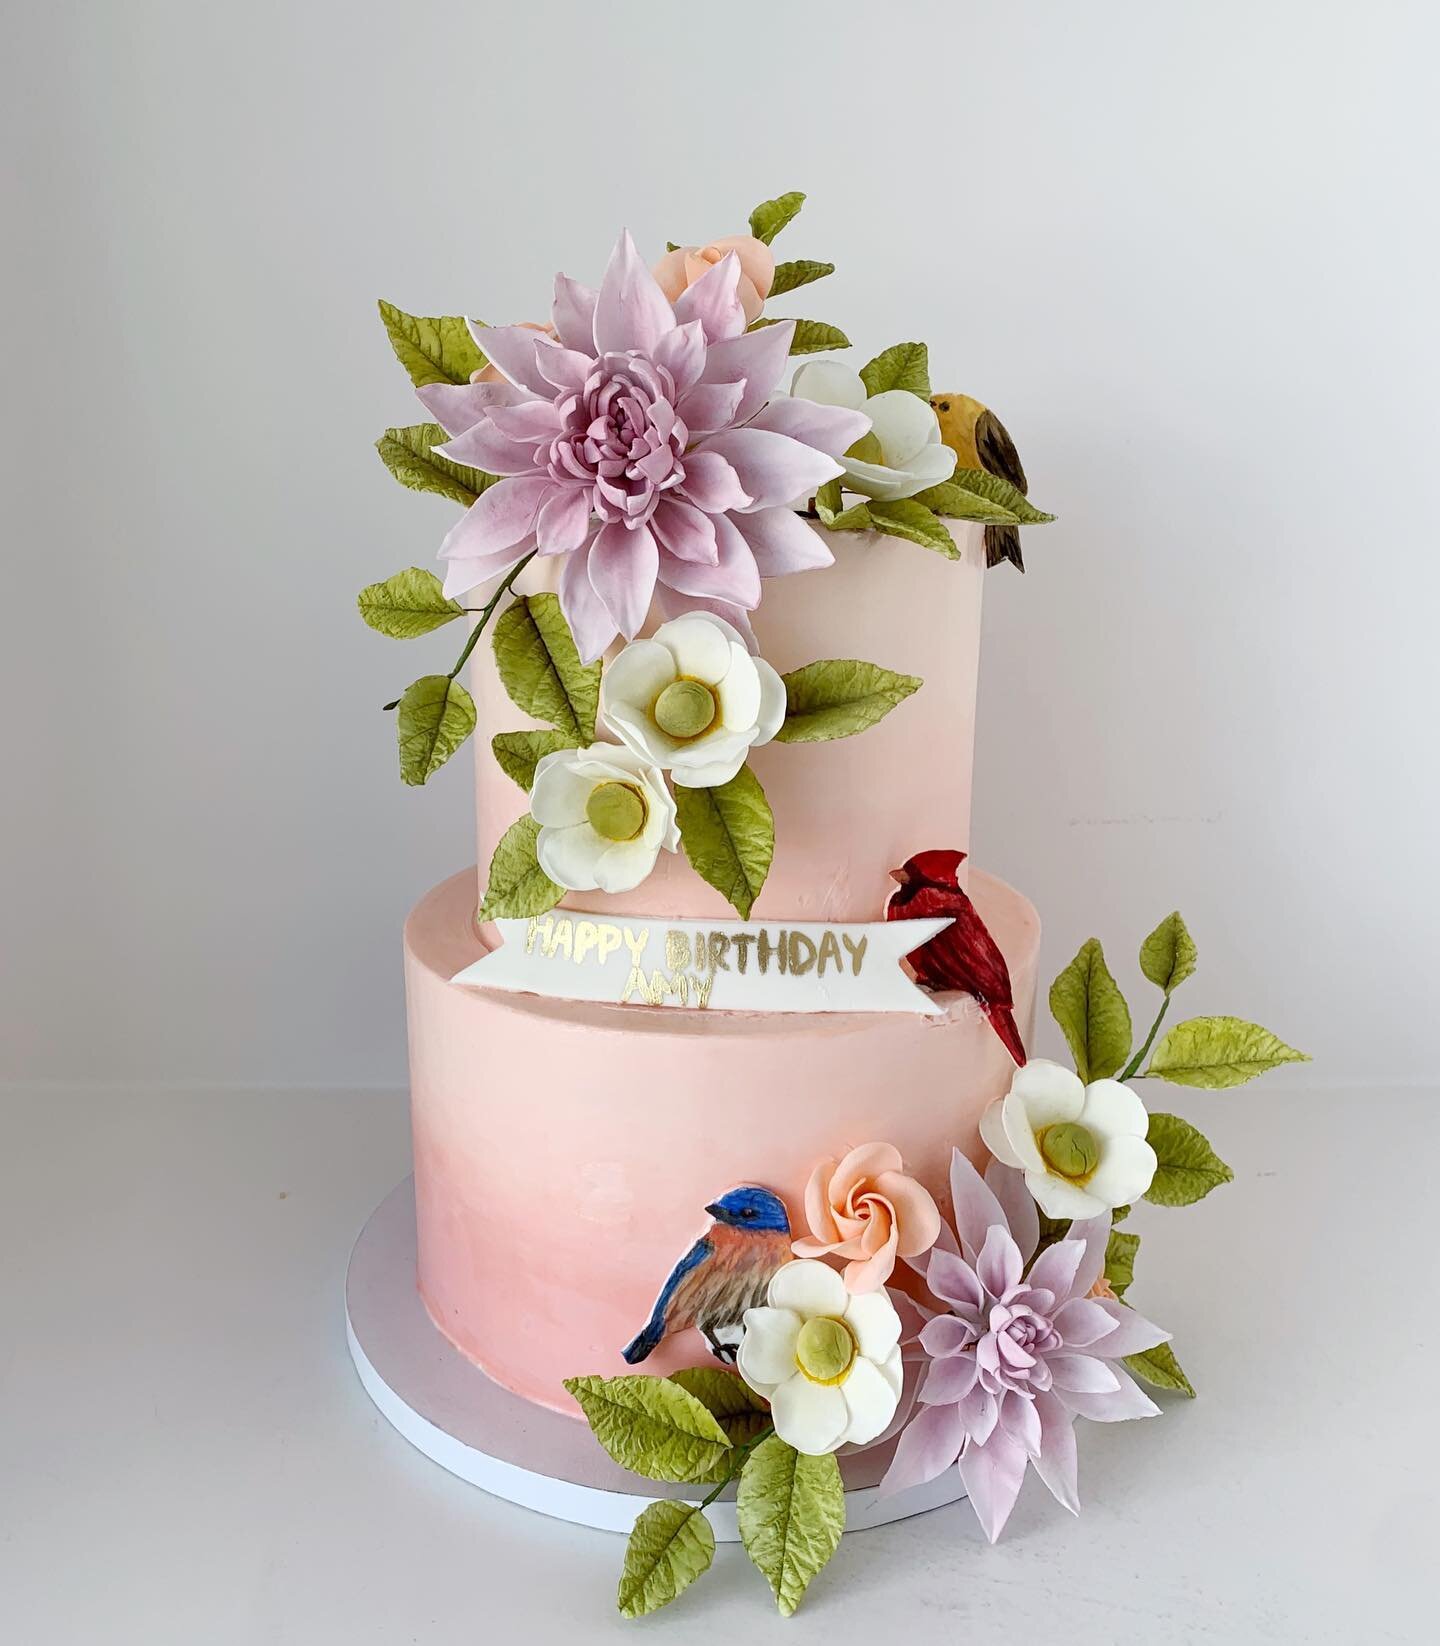 The direction was a beautiful luscious cake with bright summer flowers and love song birds and the rest was up to us to design! 🌸 Our client Amy showed the cake sketch as inspiration for her florals versus the other way around which was so flatterin